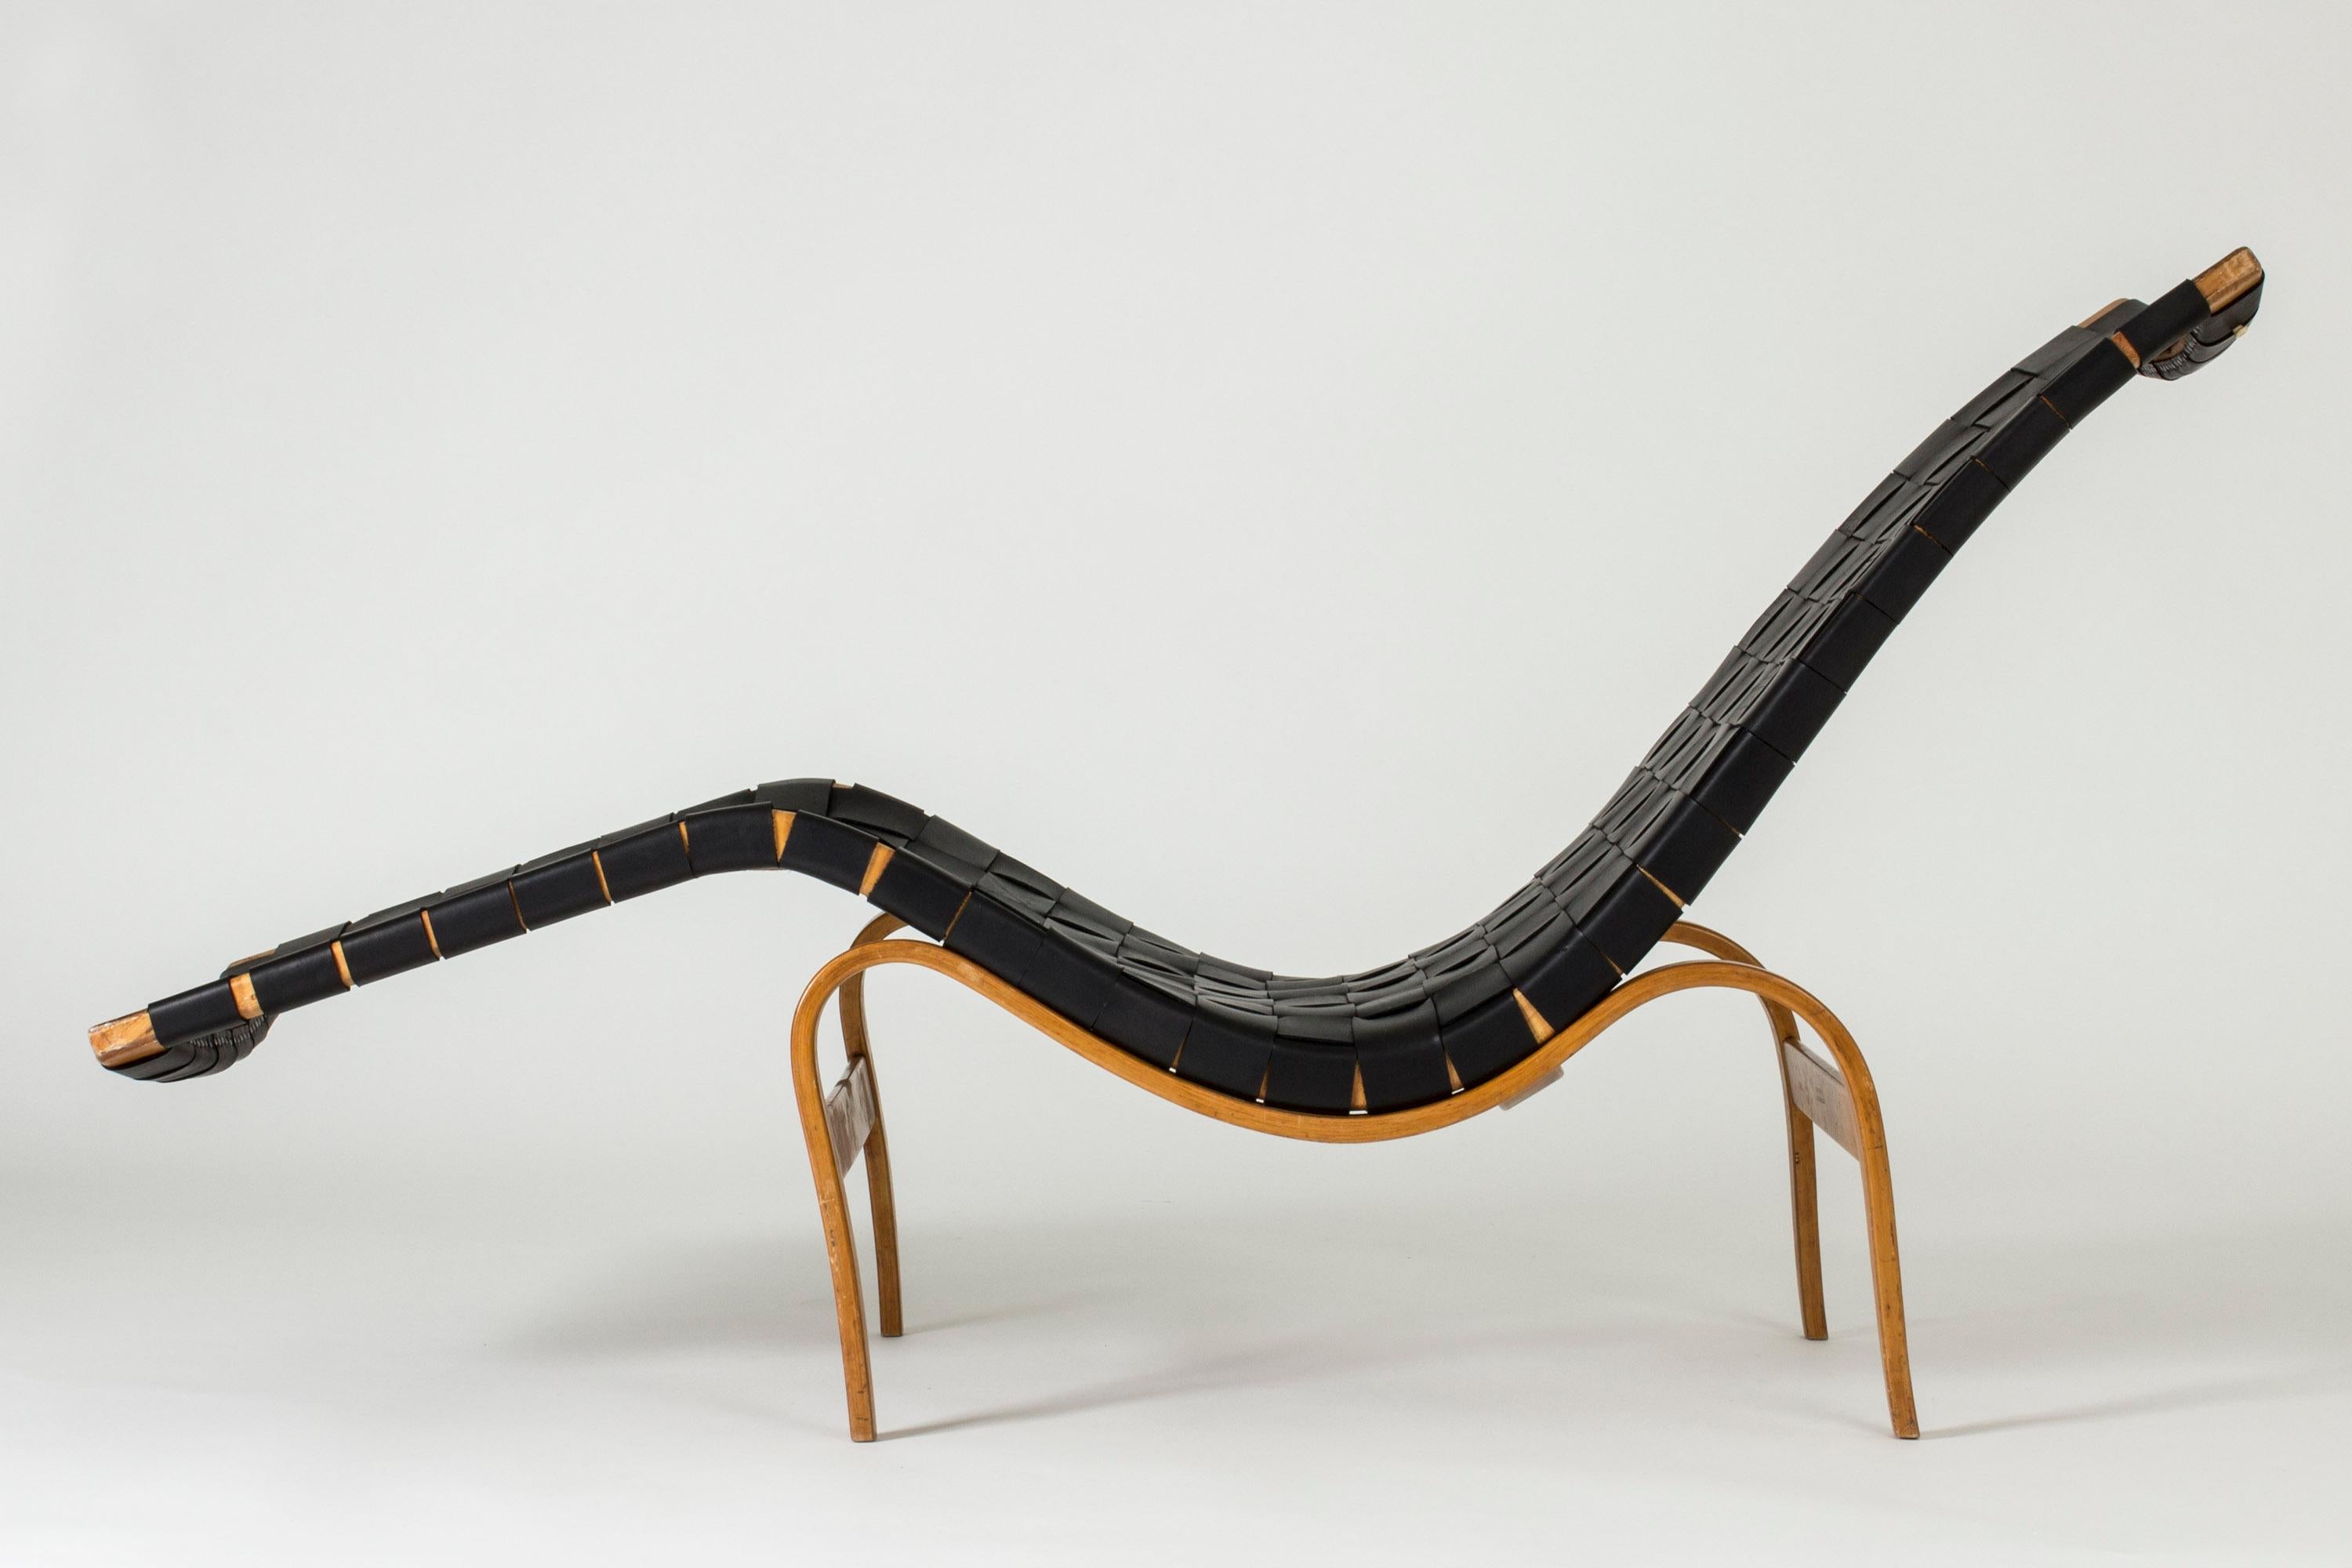 Elegant chaise lounge, “Model 36”, by Bruno Mathsson. Made from a beech bentwood frame and wreathed black leather. Bold, elongated lines. Designed in the mid-1930s.